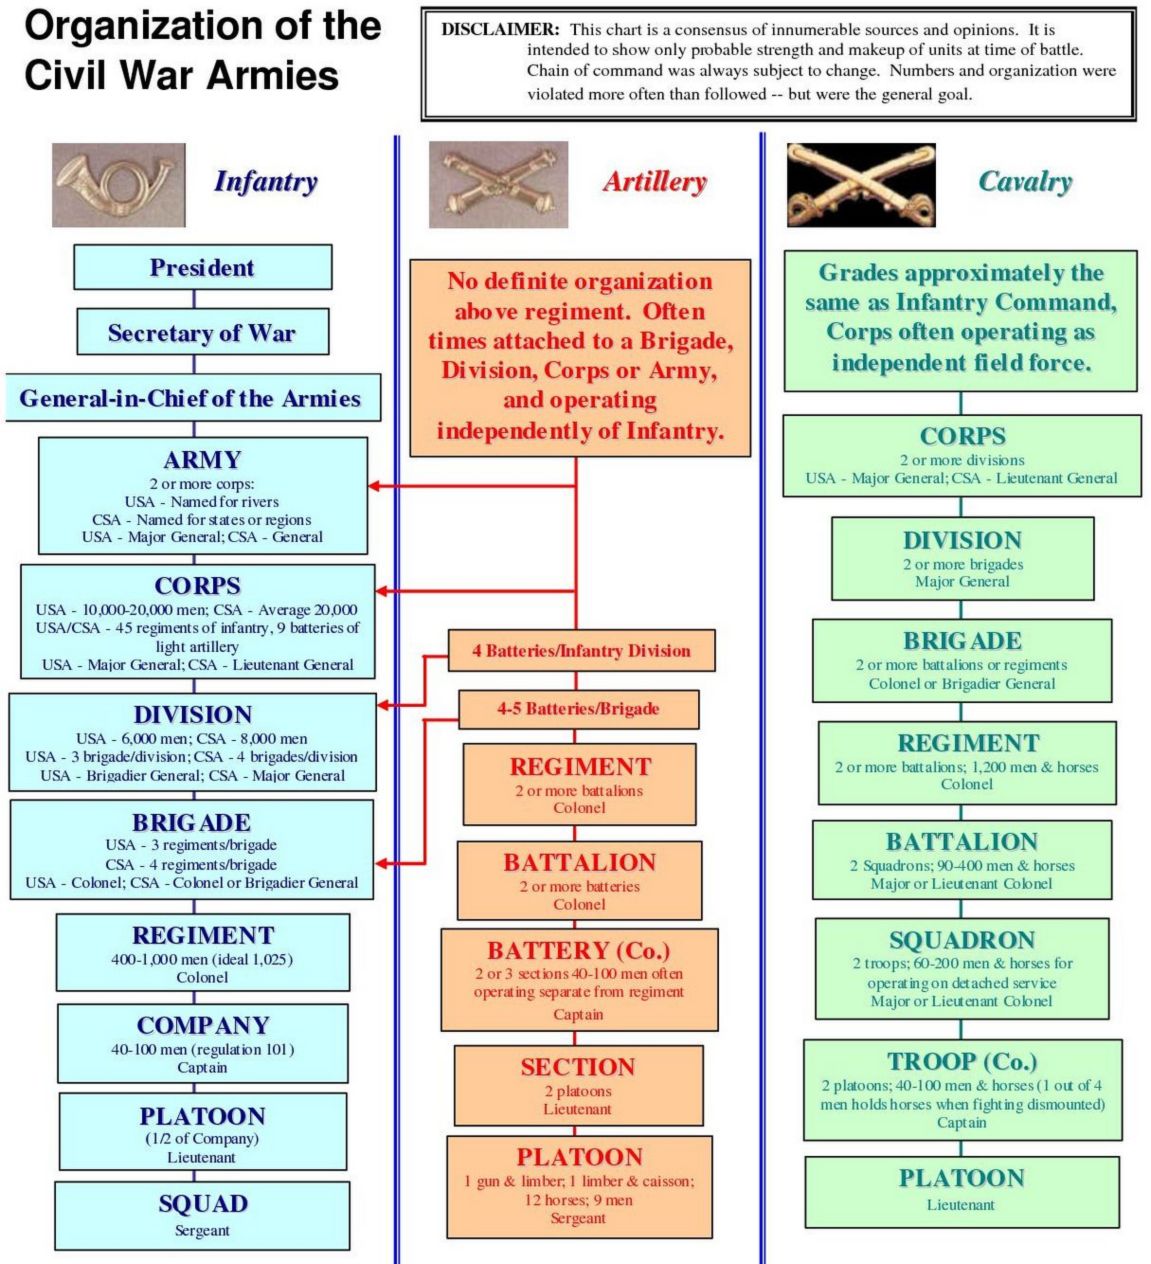 Organization of Union and Confederate Armies.jpg